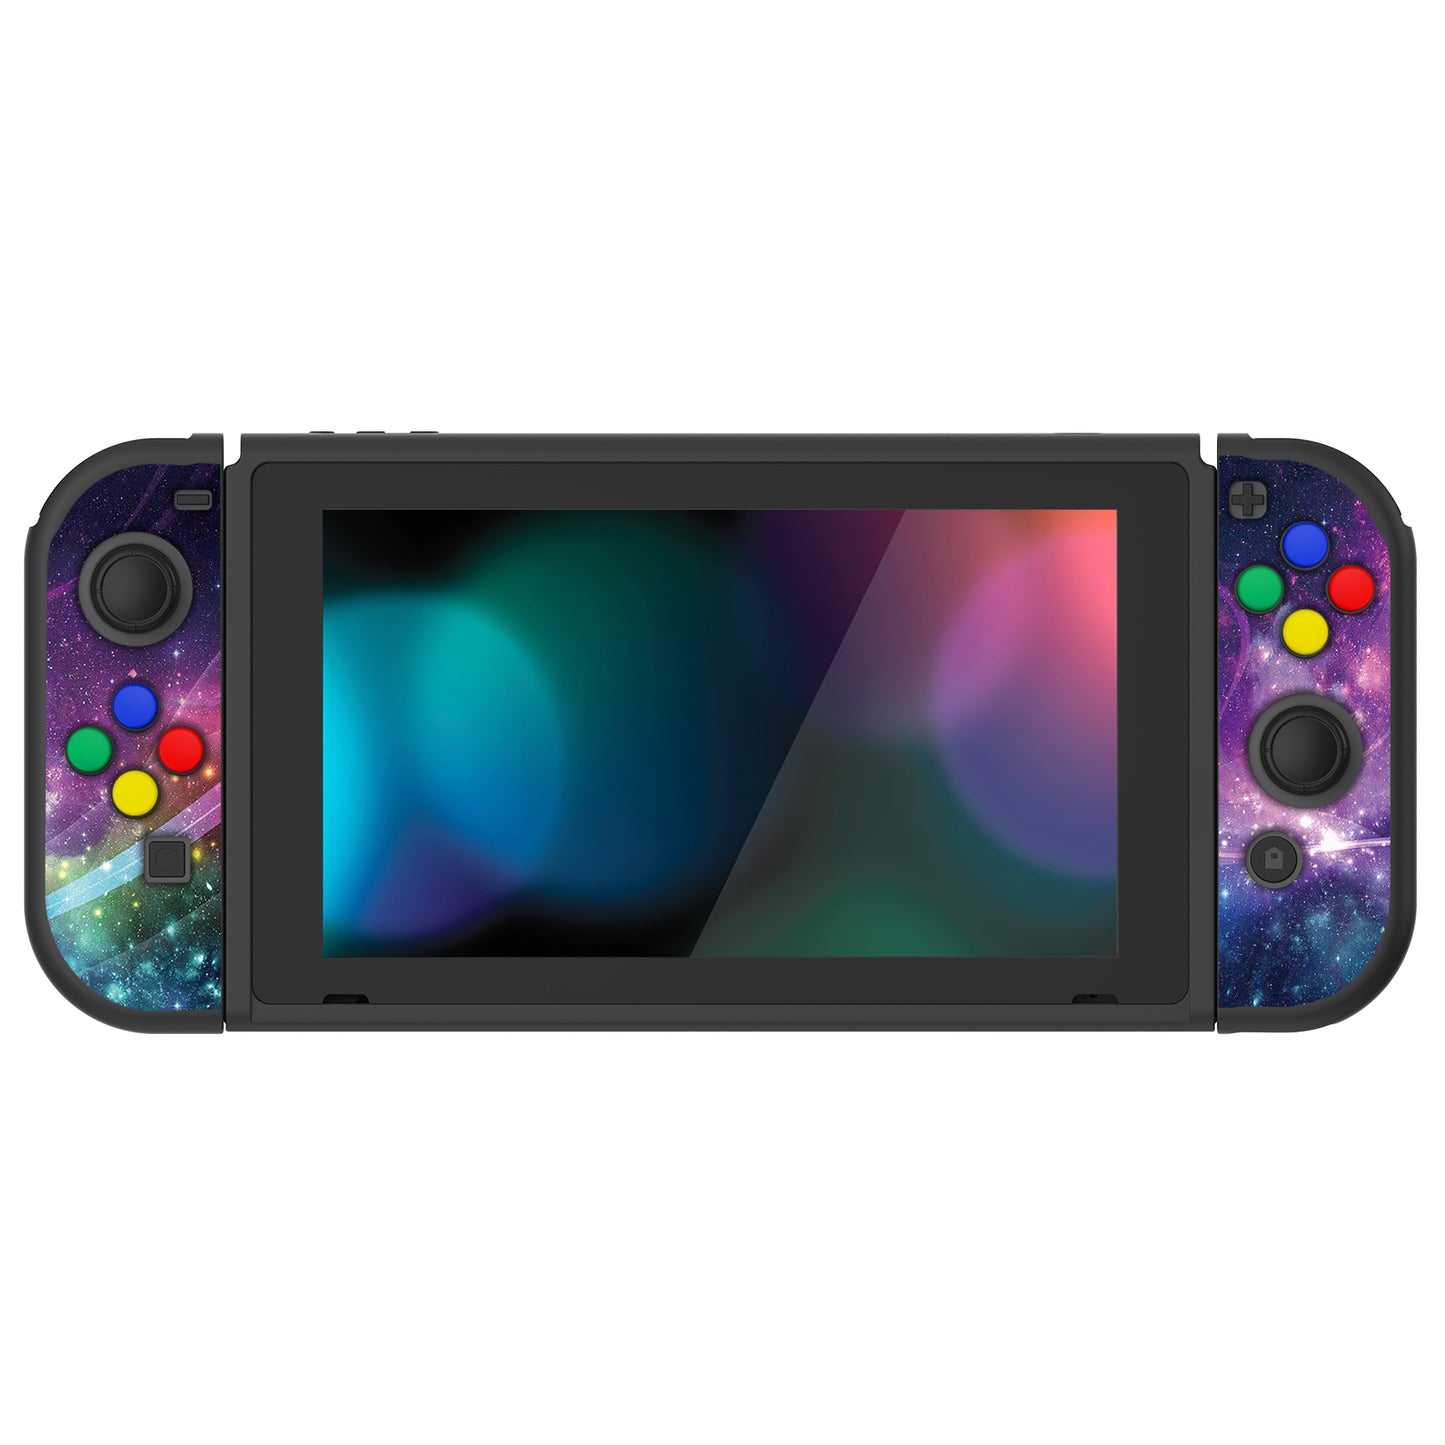 PlayVital Purple Galaxy Protective Case for NS Switch, Soft TPU Slim Case Cover for NS Switch Console with Colorful ABXY Direction Button Caps - NTU6015G2 PlayVital